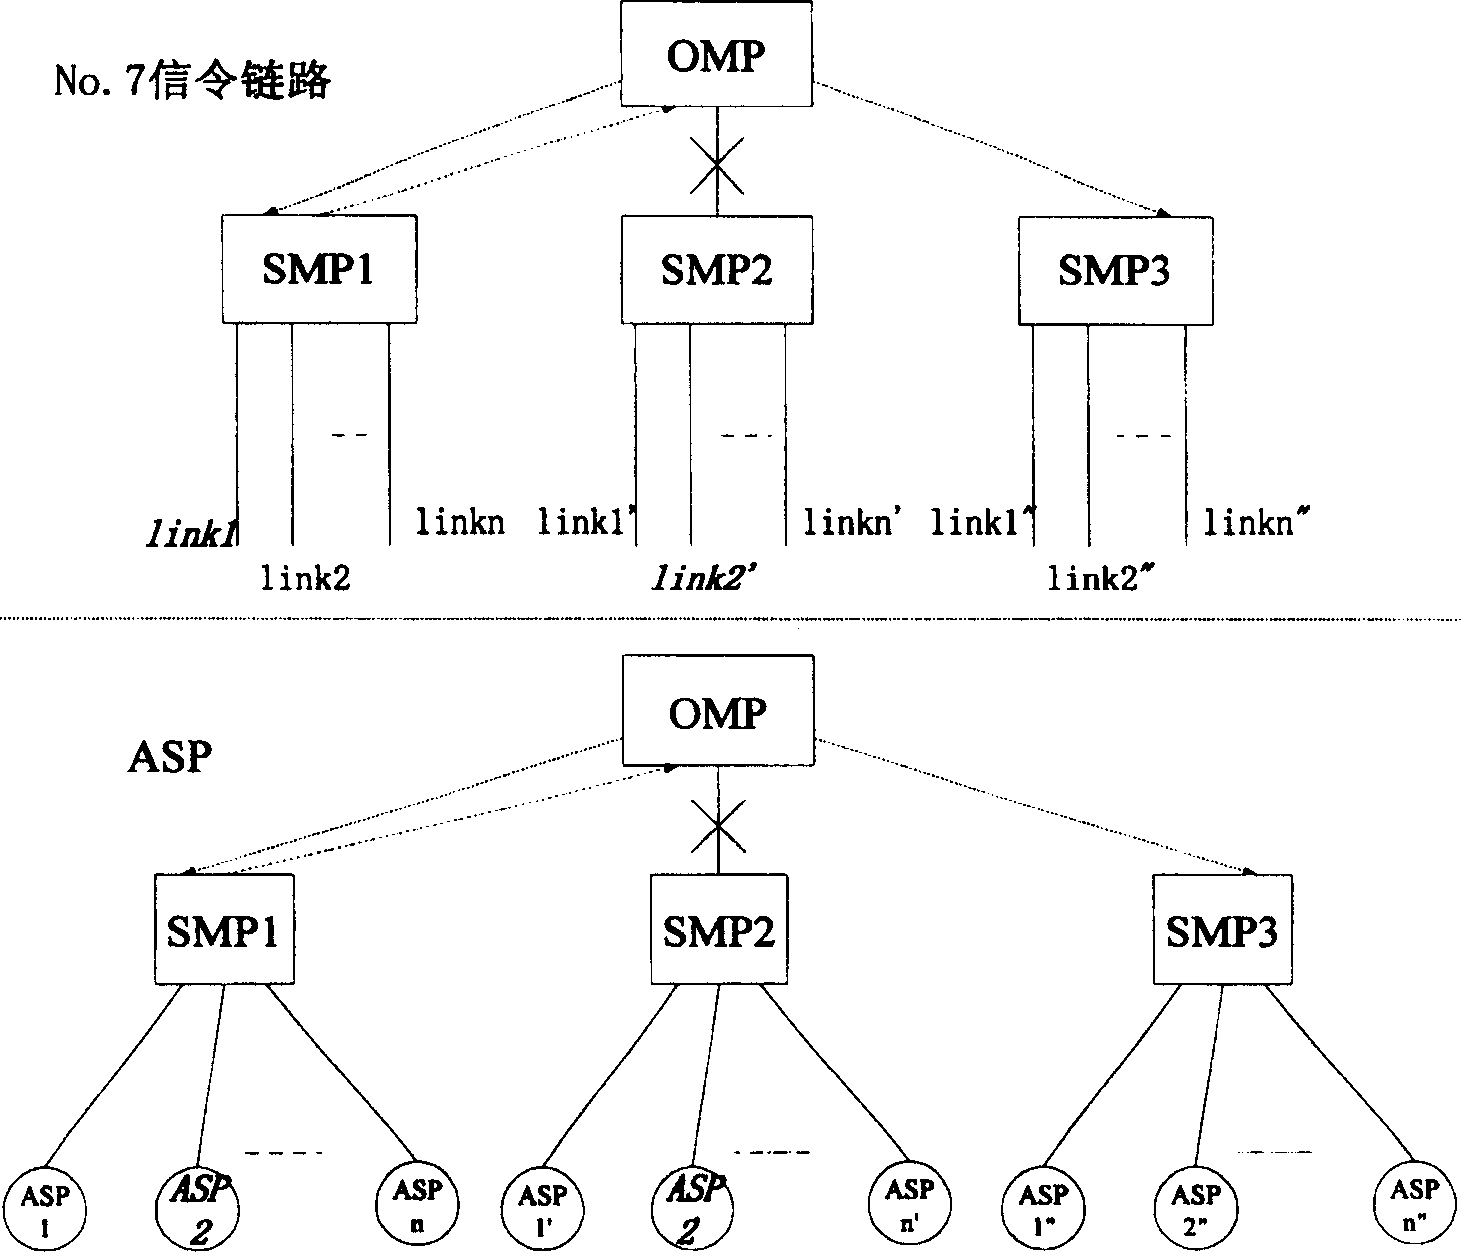 Method for distributed multi-module management of No.7 signalling / application server  process